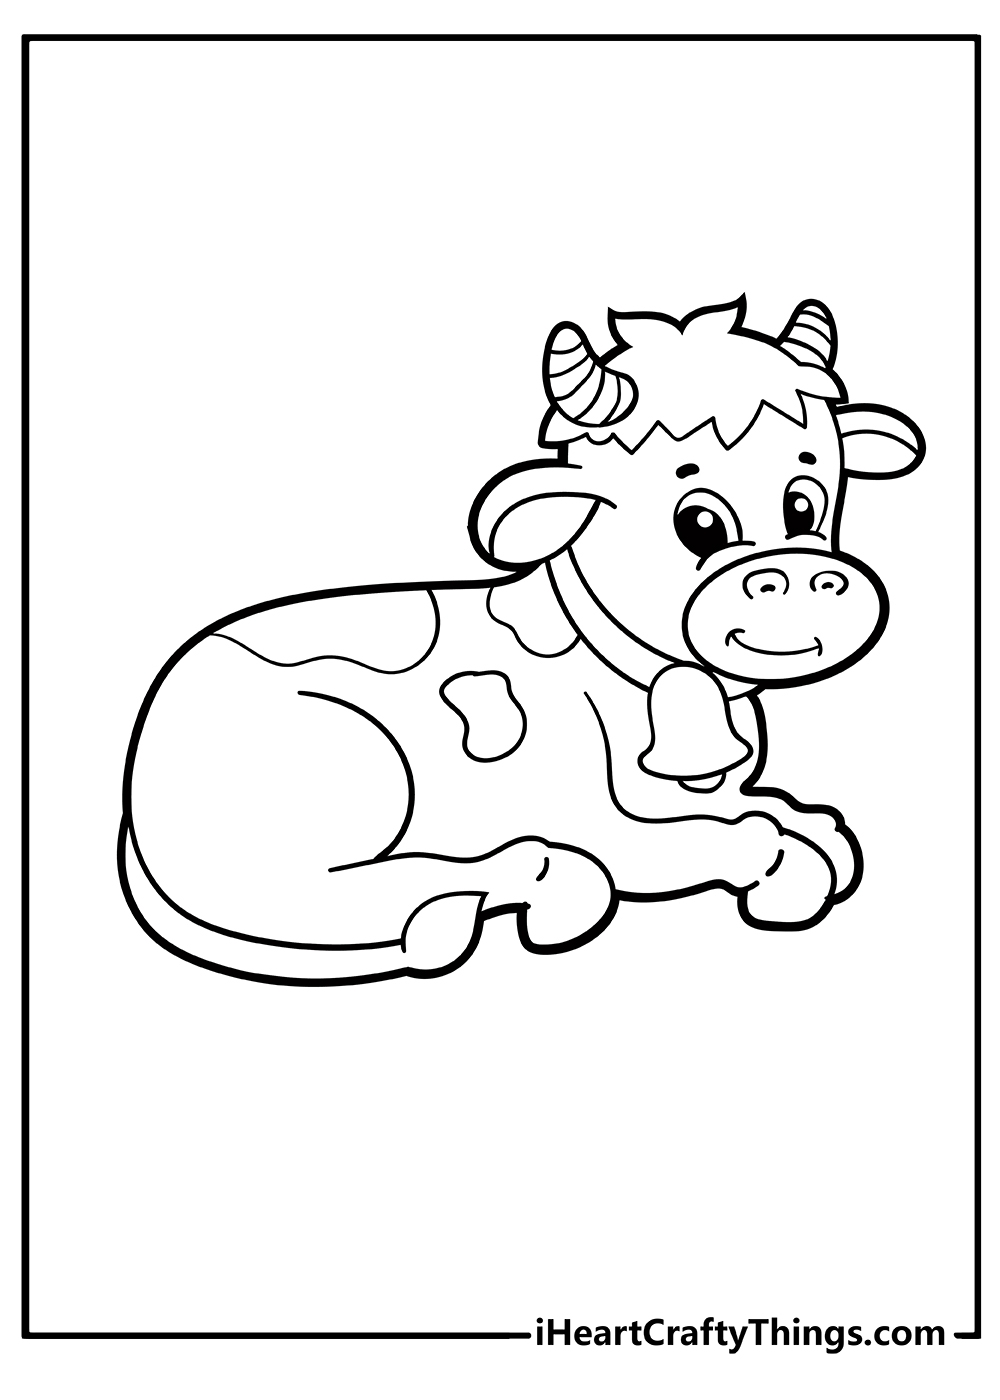 Cow Coloring Pages 100 Free Printables - Coloring Pages of Cows Free Printable